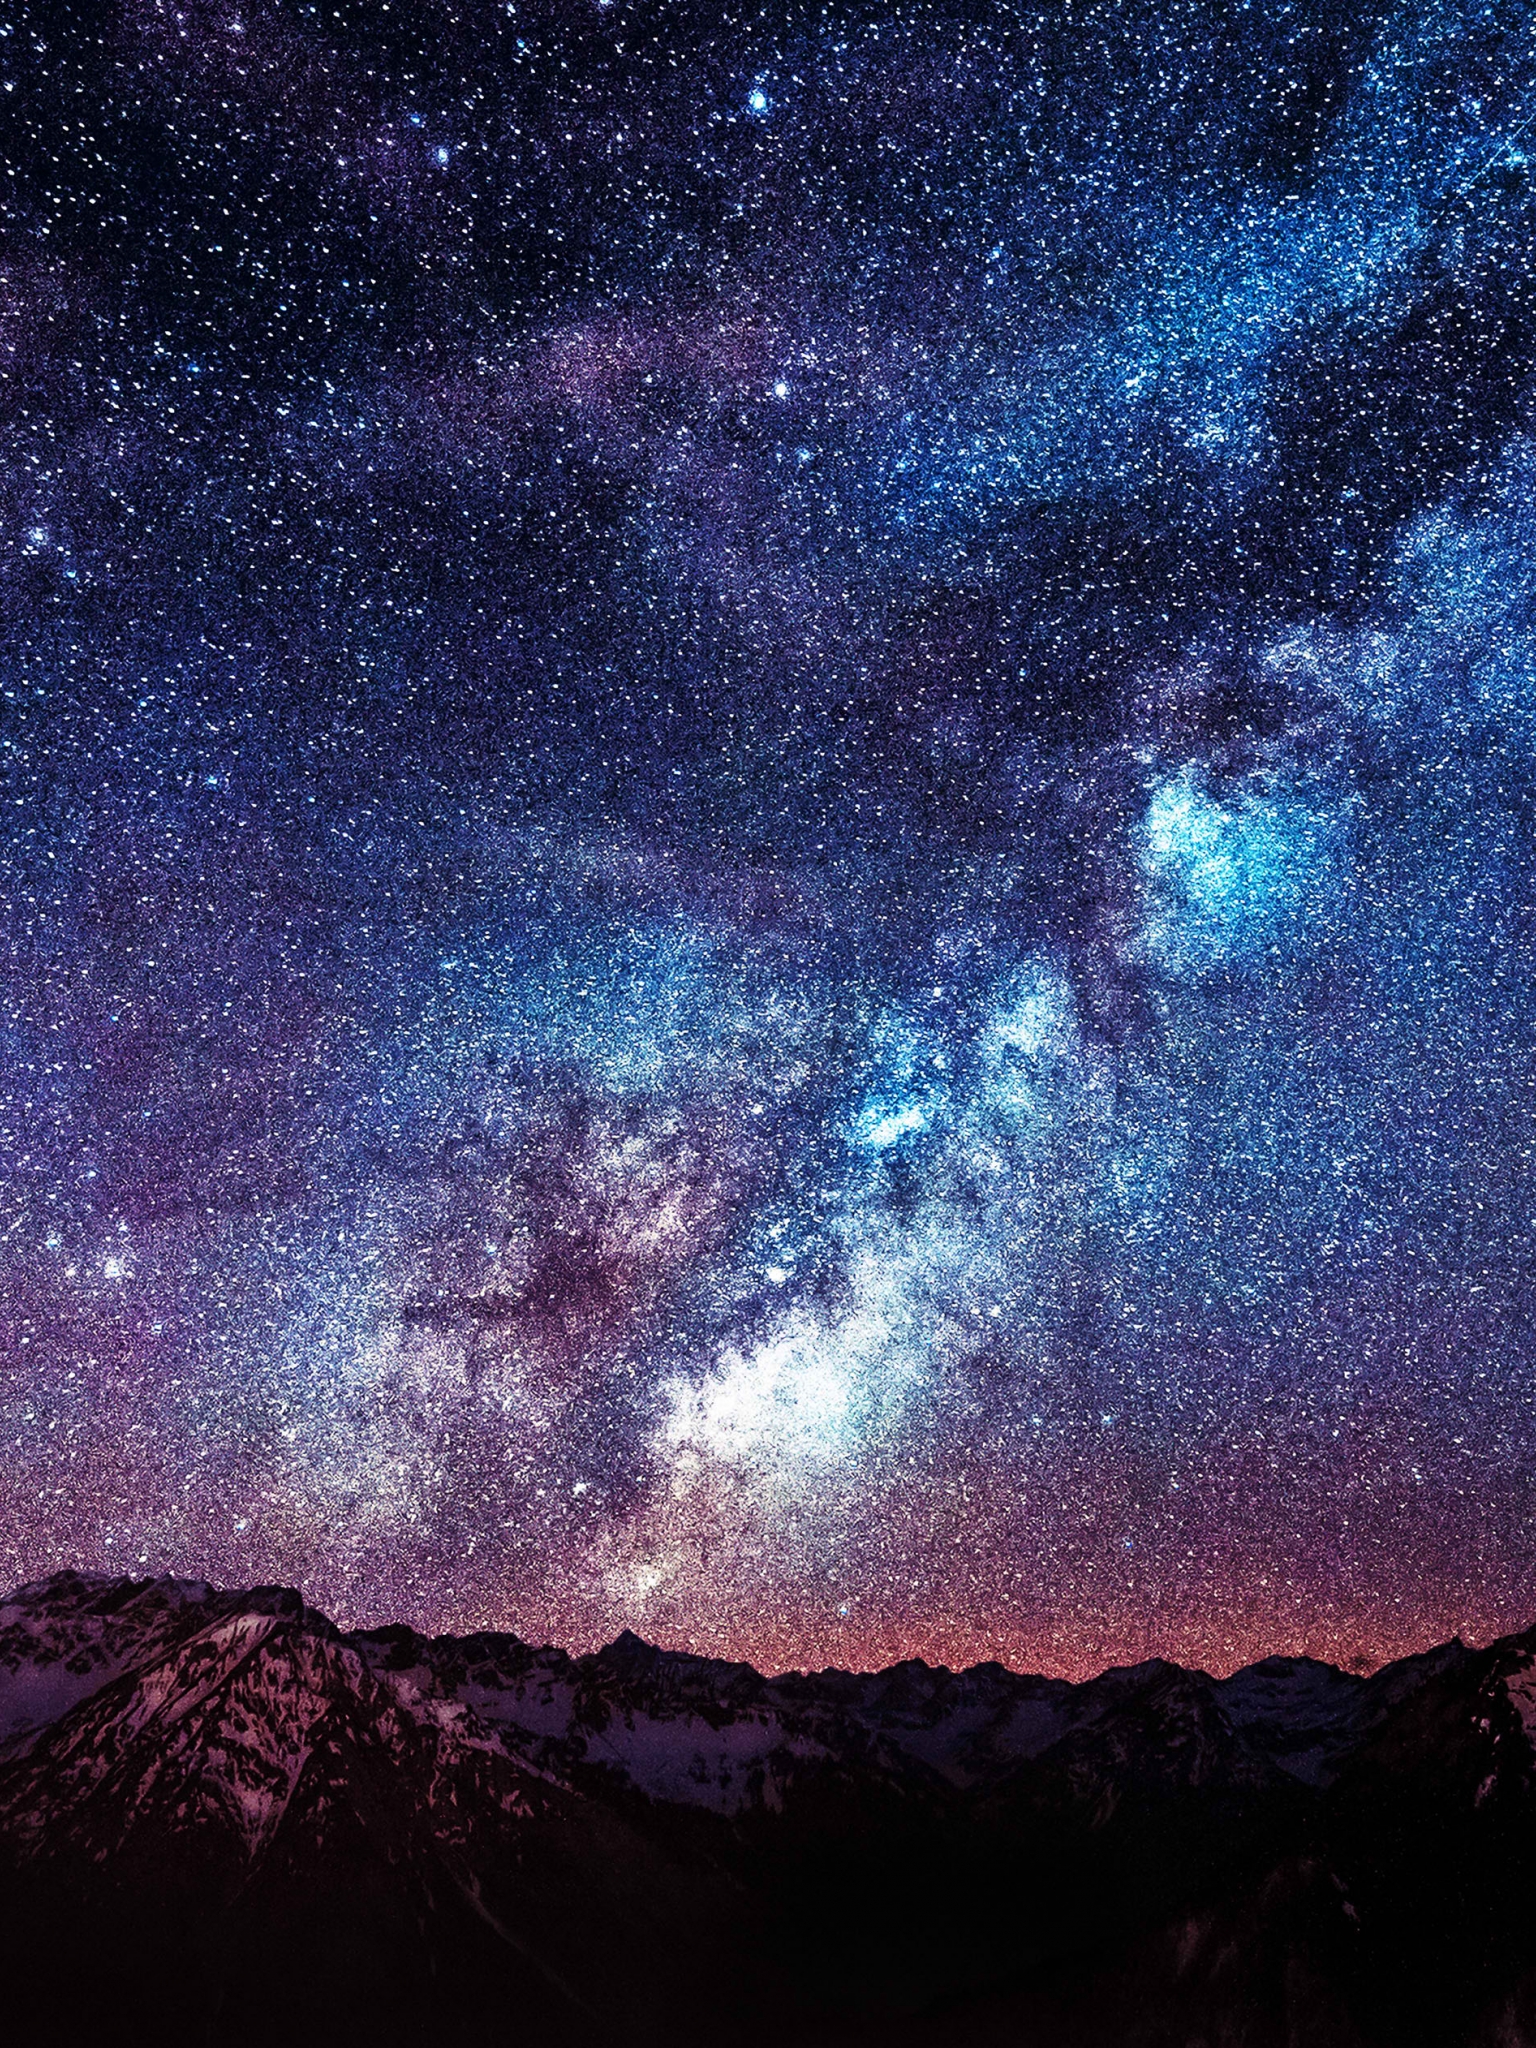 Wallpaper Amazing Milkyway Space Mountain Red 9 Wallpaperjpg - Iphone Galaxy Wallpaper Hd , HD Wallpaper & Backgrounds